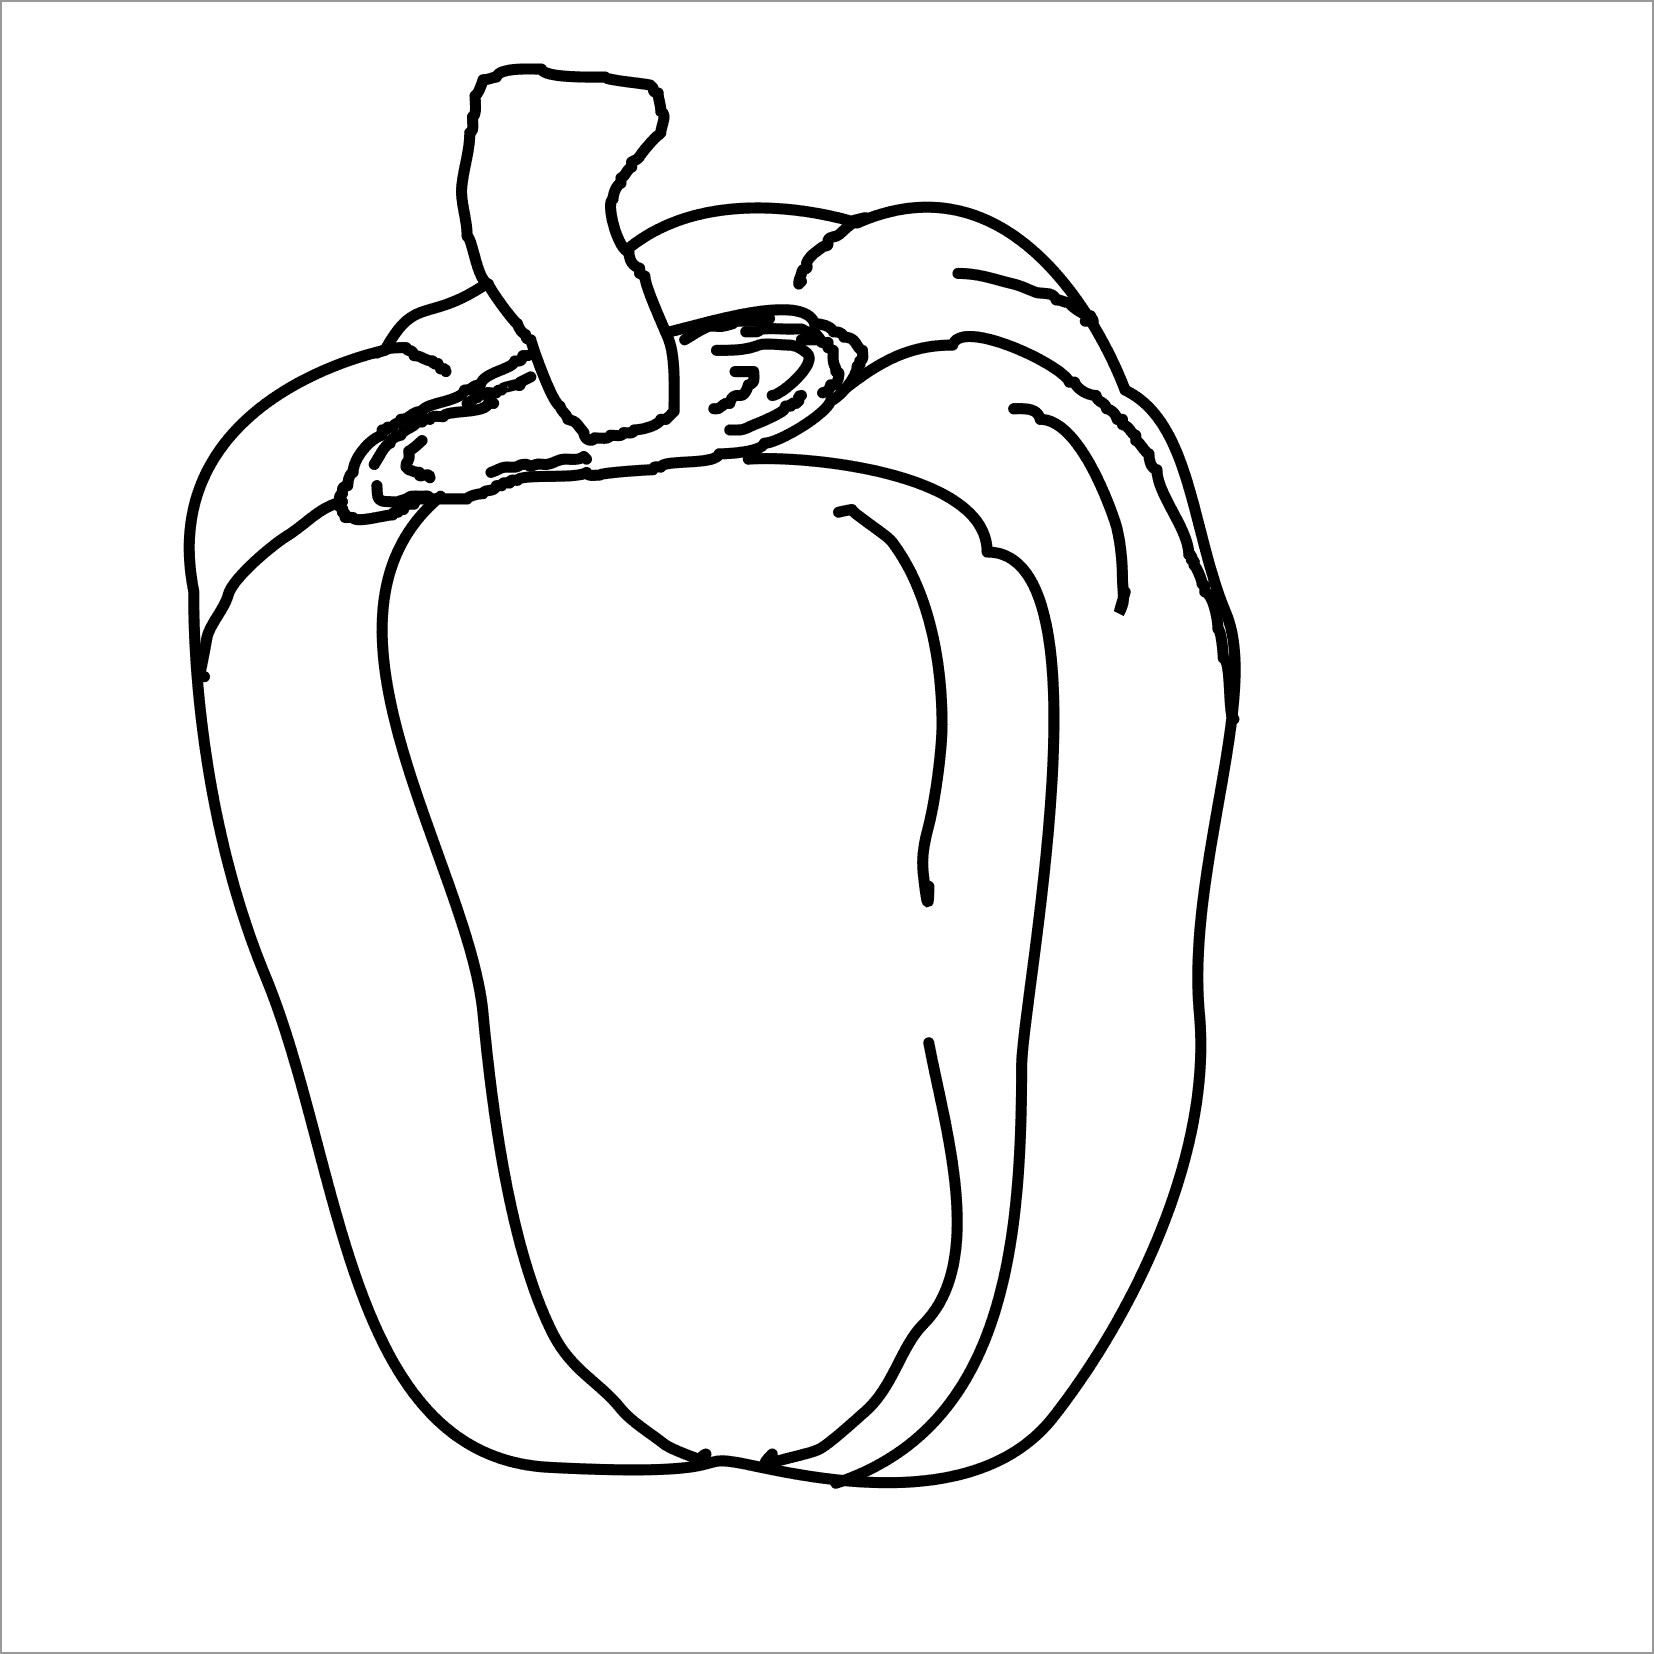 Pepper Coloring Page for Kids